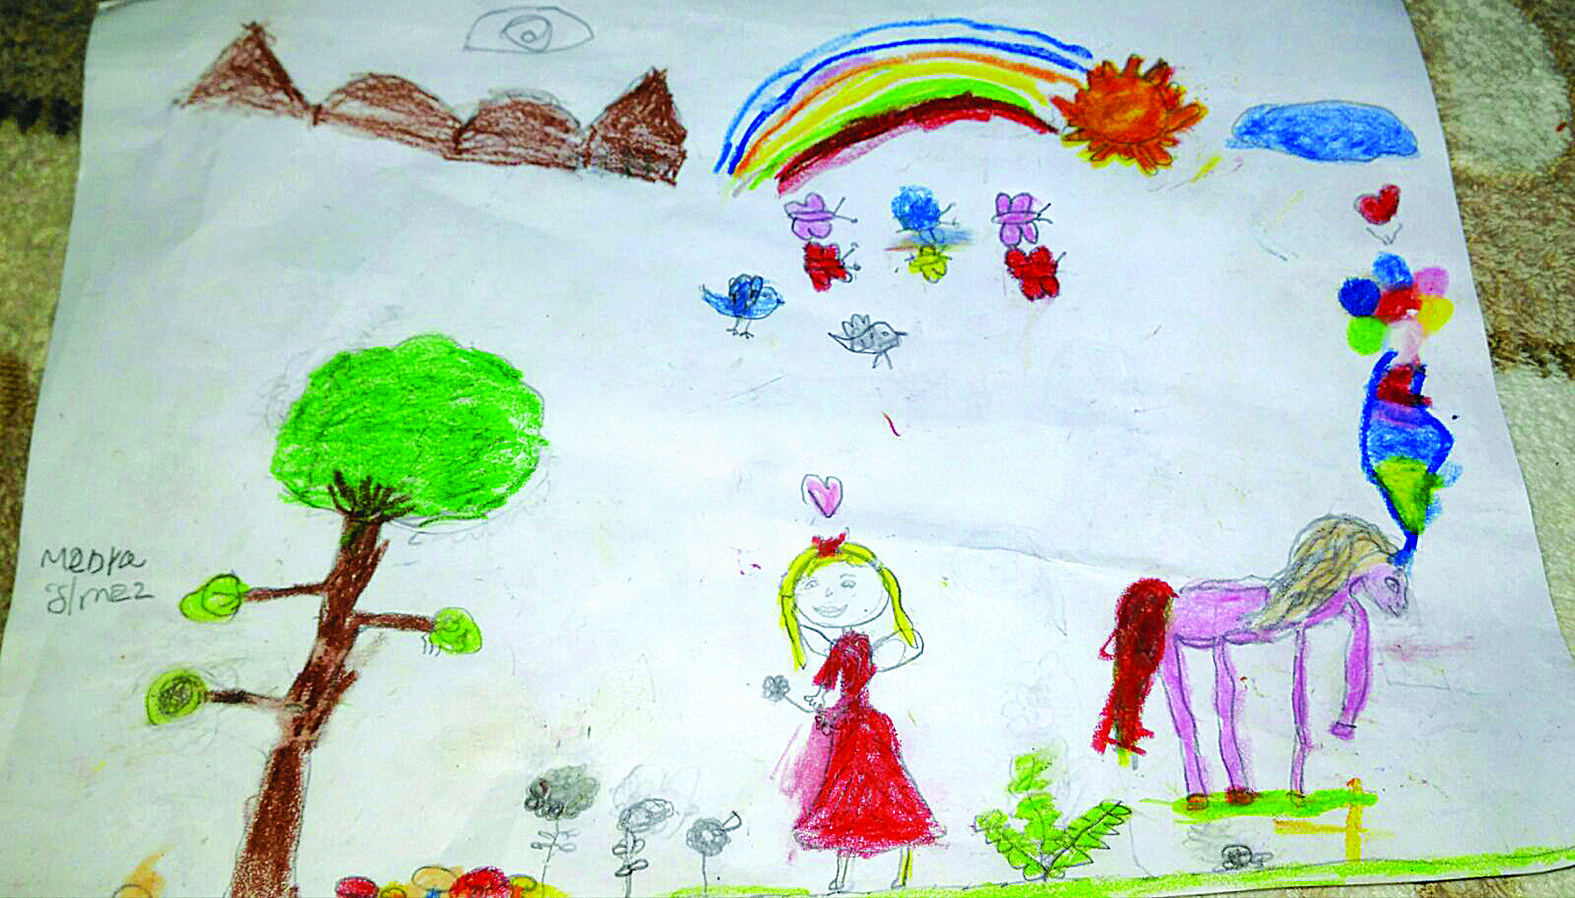 RESULTS OF THE AKKUYU NUCLEAR JSC NATIONAL CHILDREN'S DRAWING CONTEST  SUMMED UP